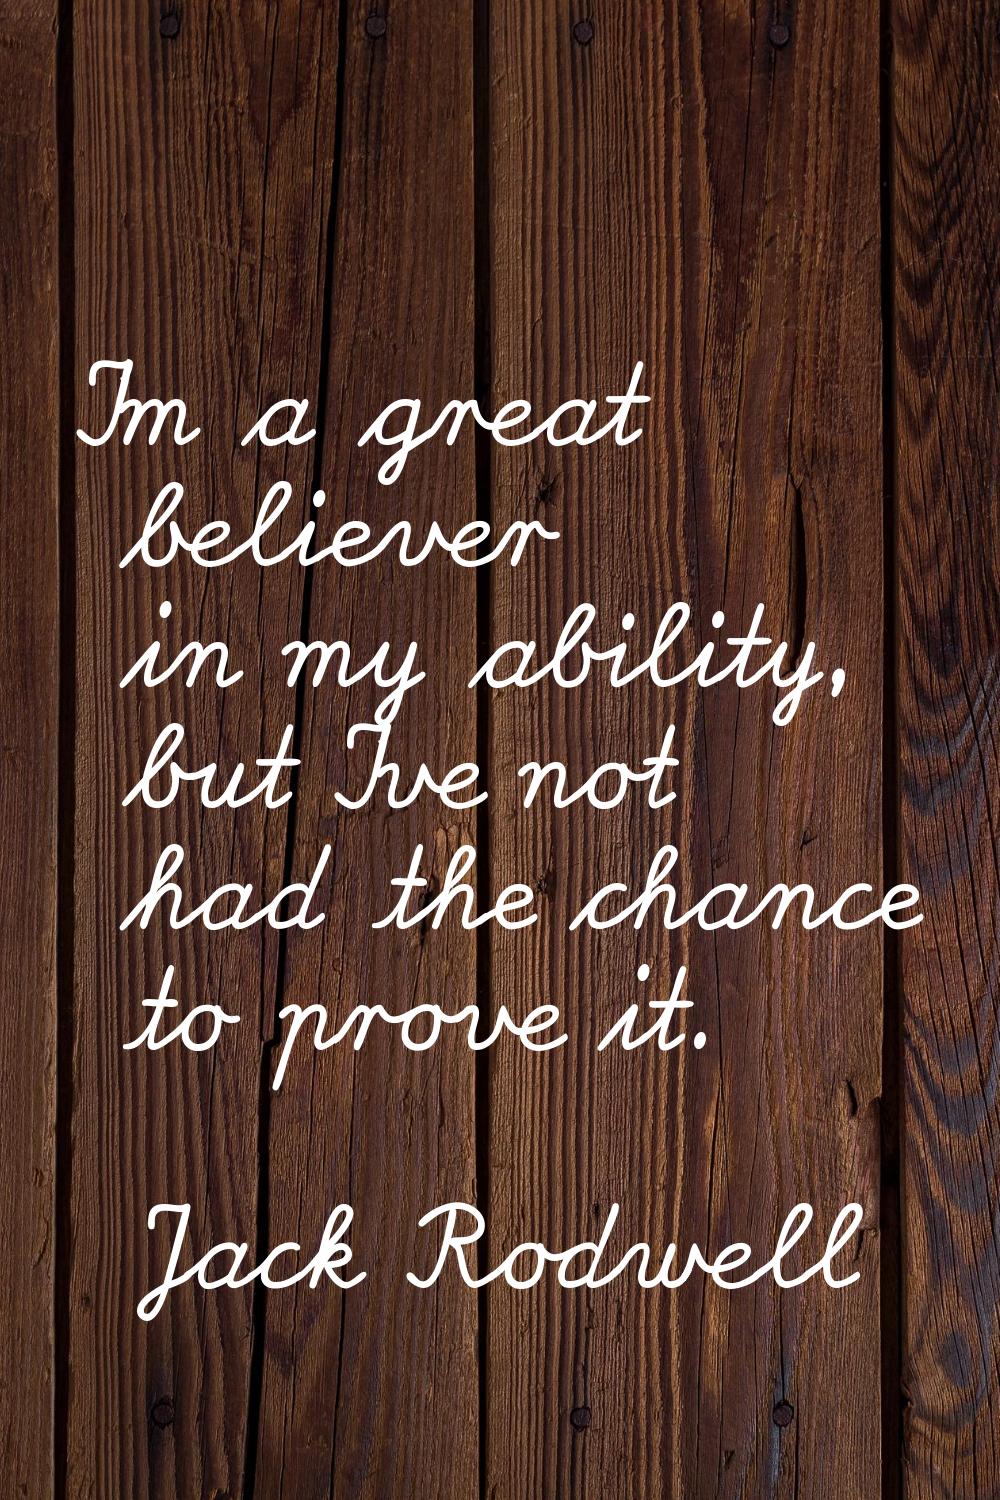 I'm a great believer in my ability, but I've not had the chance to prove it.